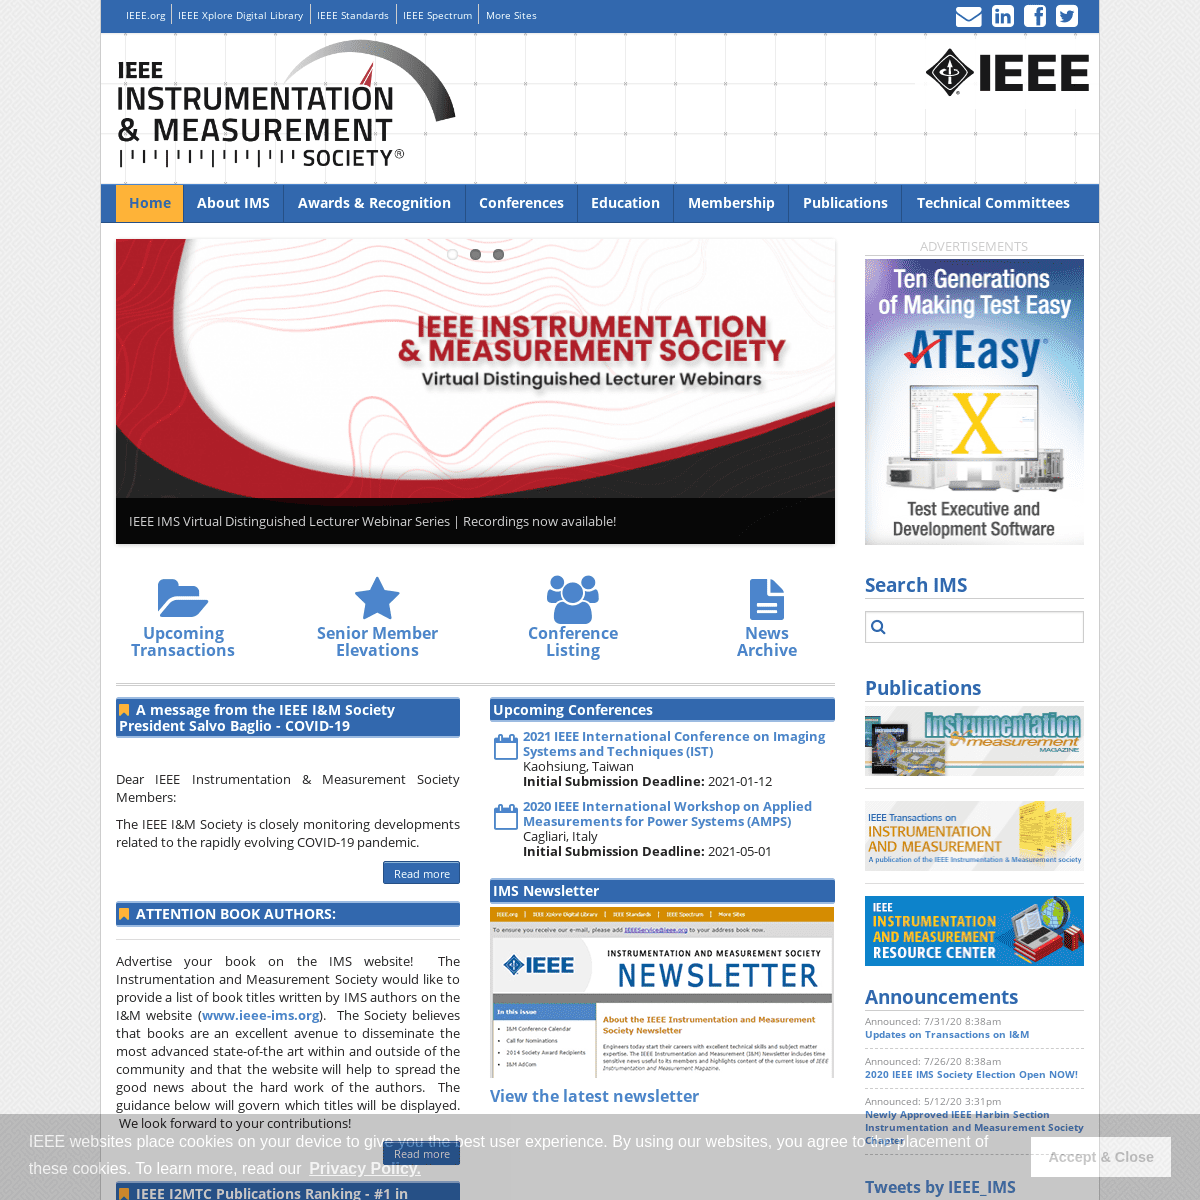 A complete backup of ieee-ims.org